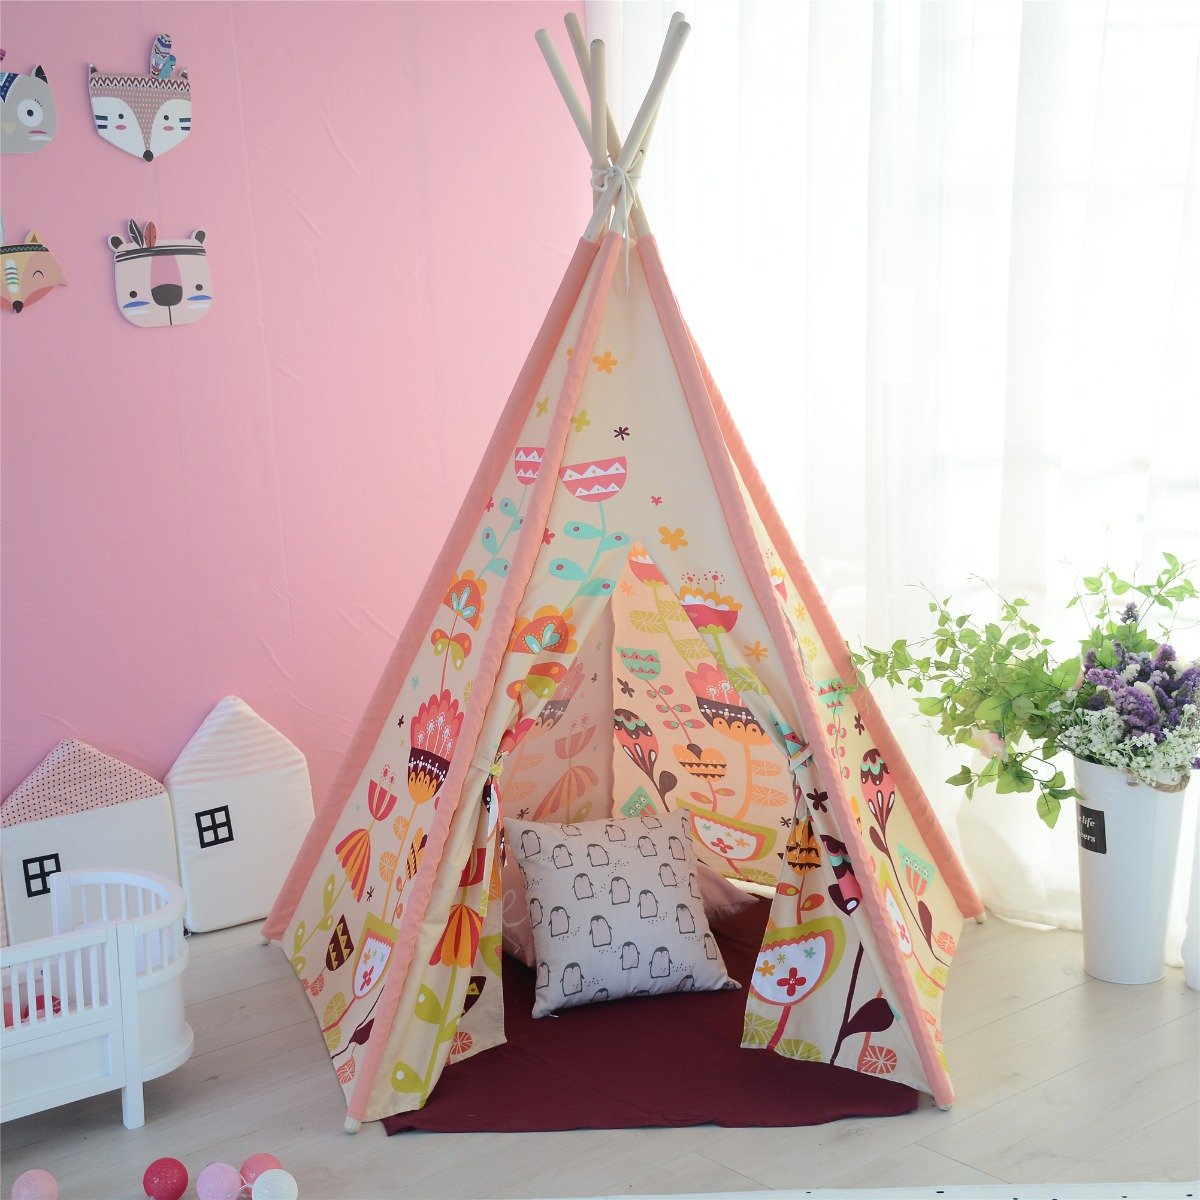 All 4 Kids Nora Large Pink Blooming Kids Teepee Tent